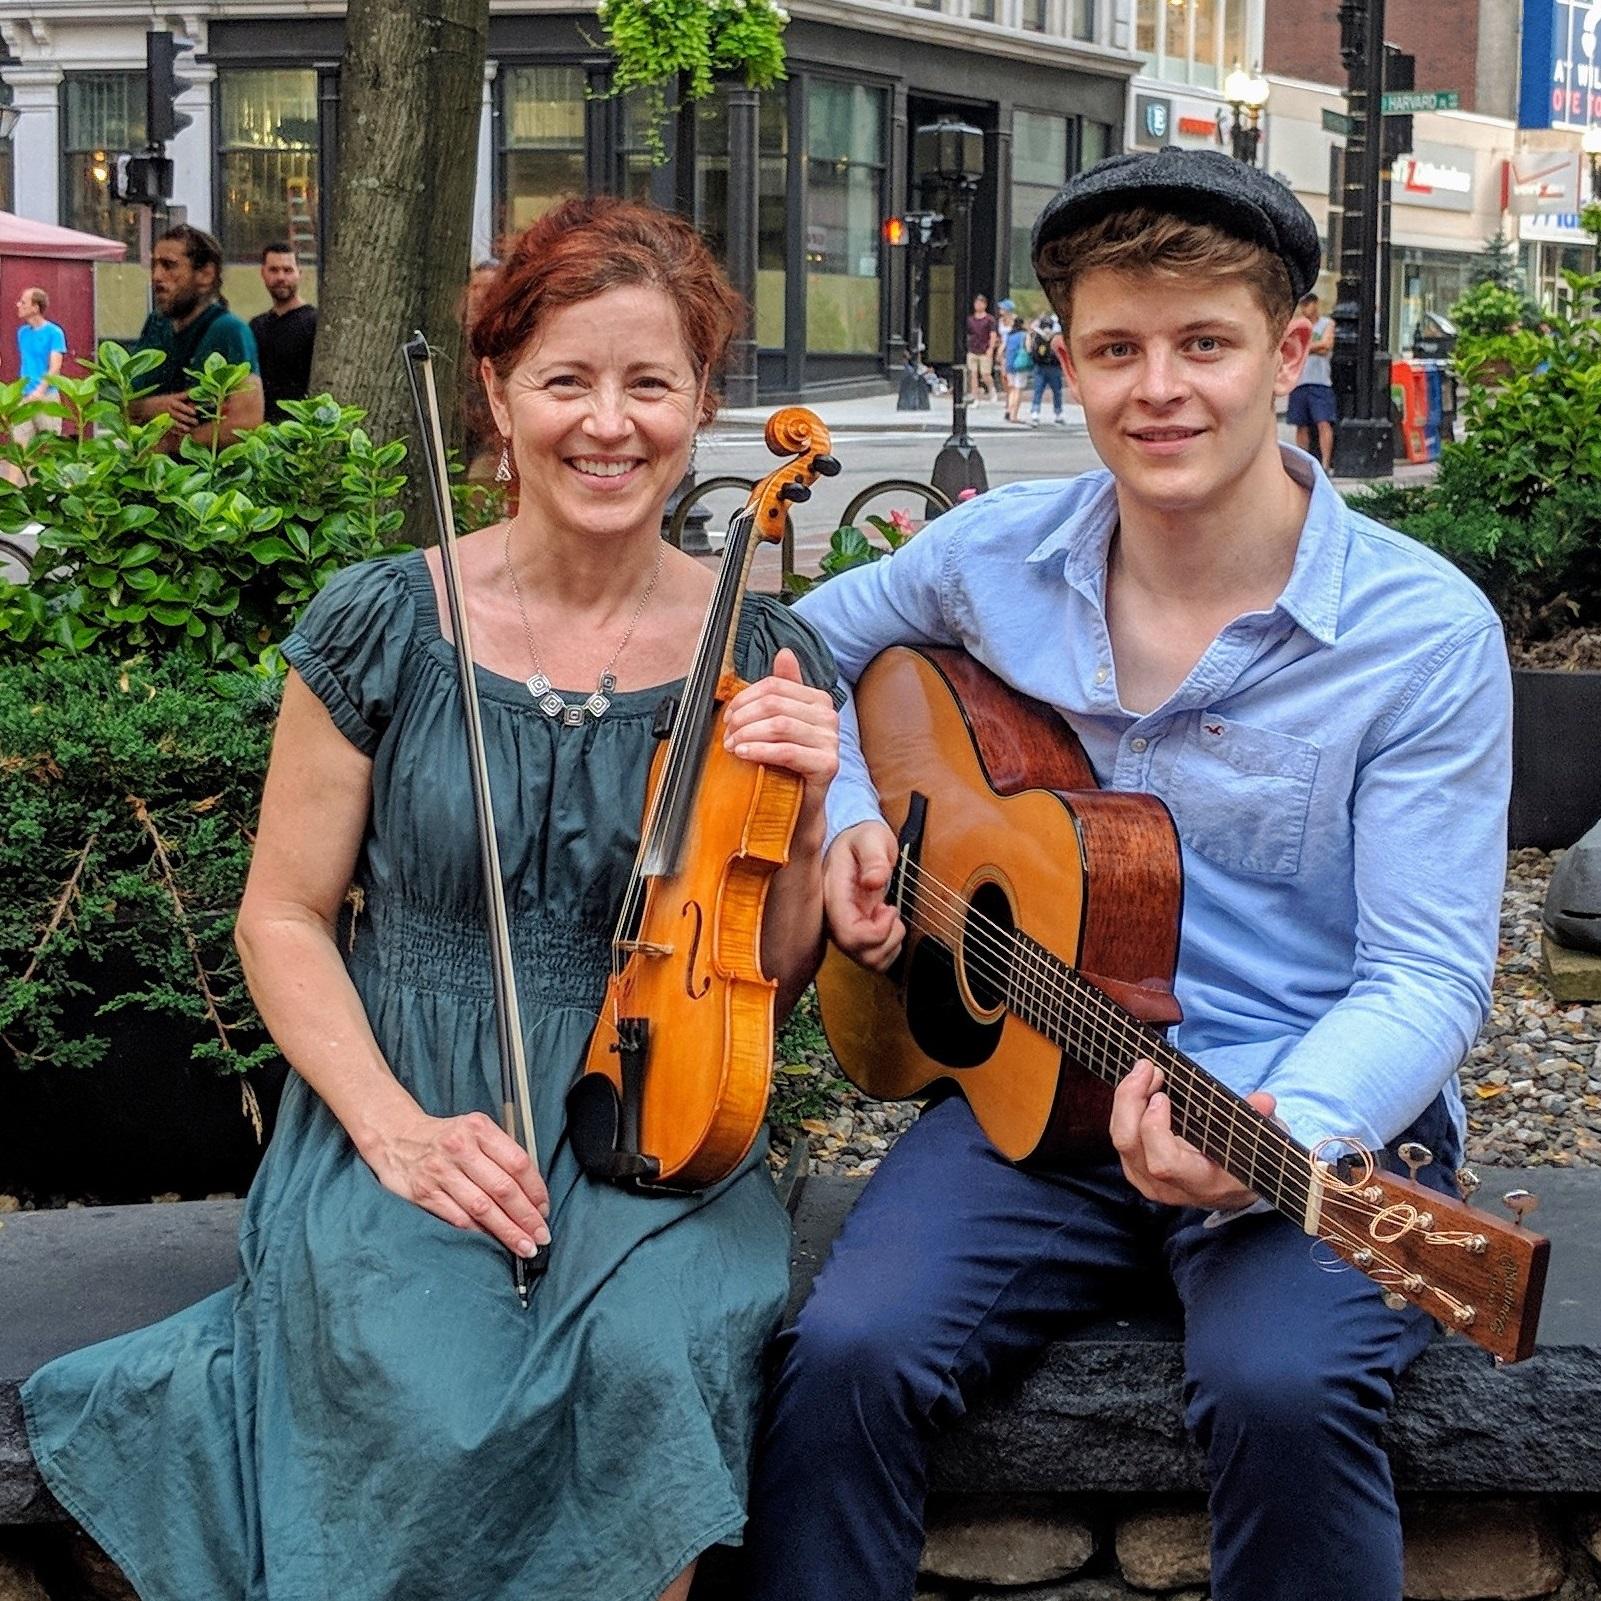 Image of Nancy Bell sitting next to Calum Bell, she is holding a violin and he is holding a guitar.